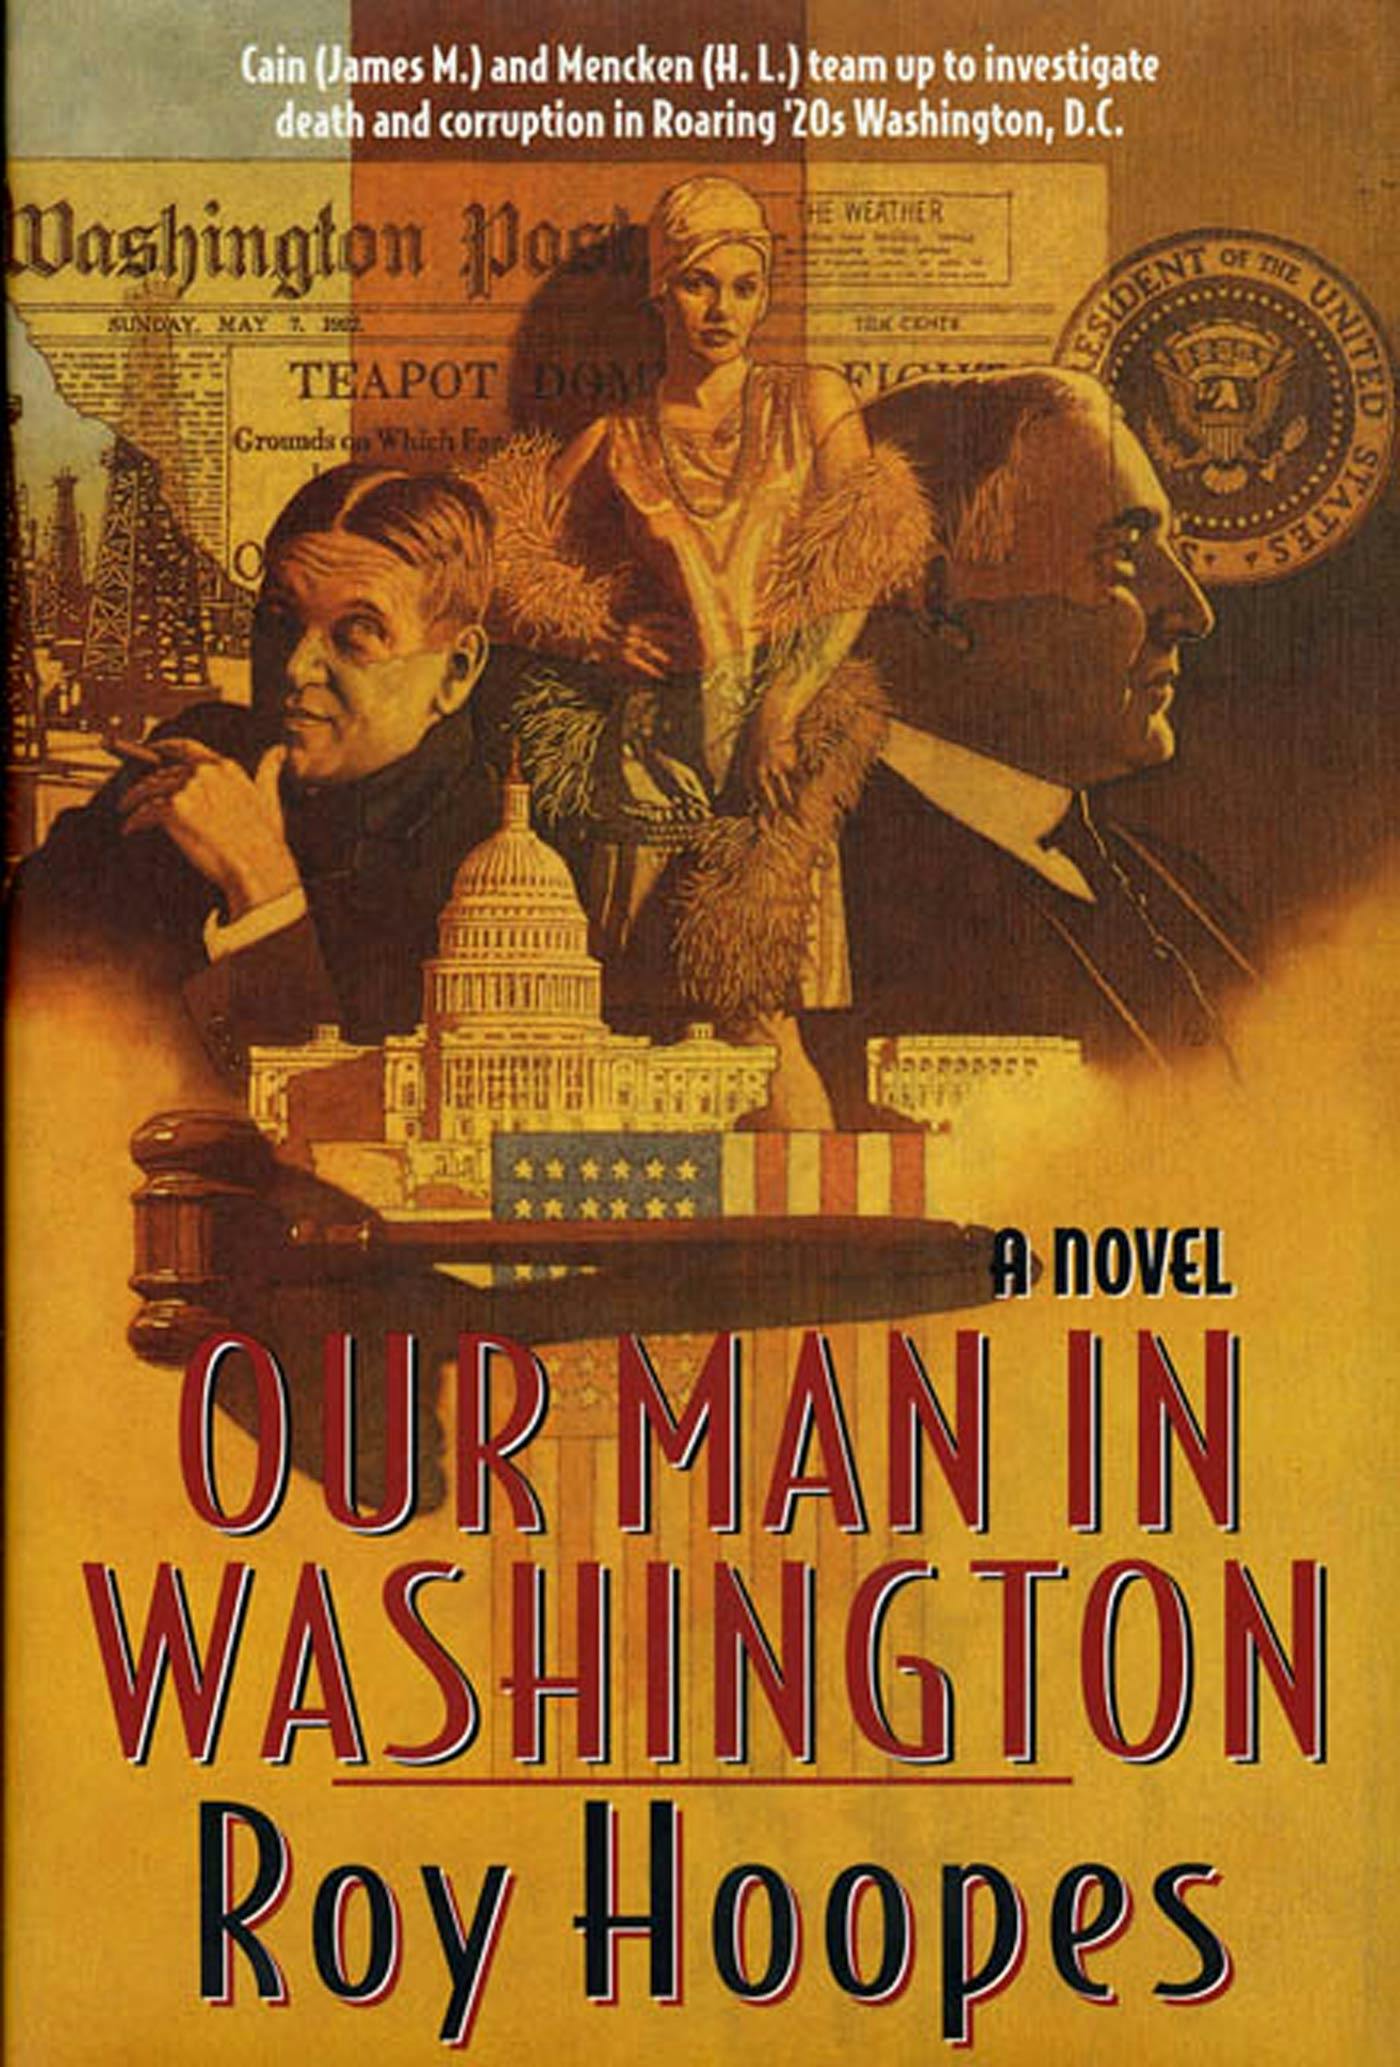 Cover for the book titled as: Our Man In Washington